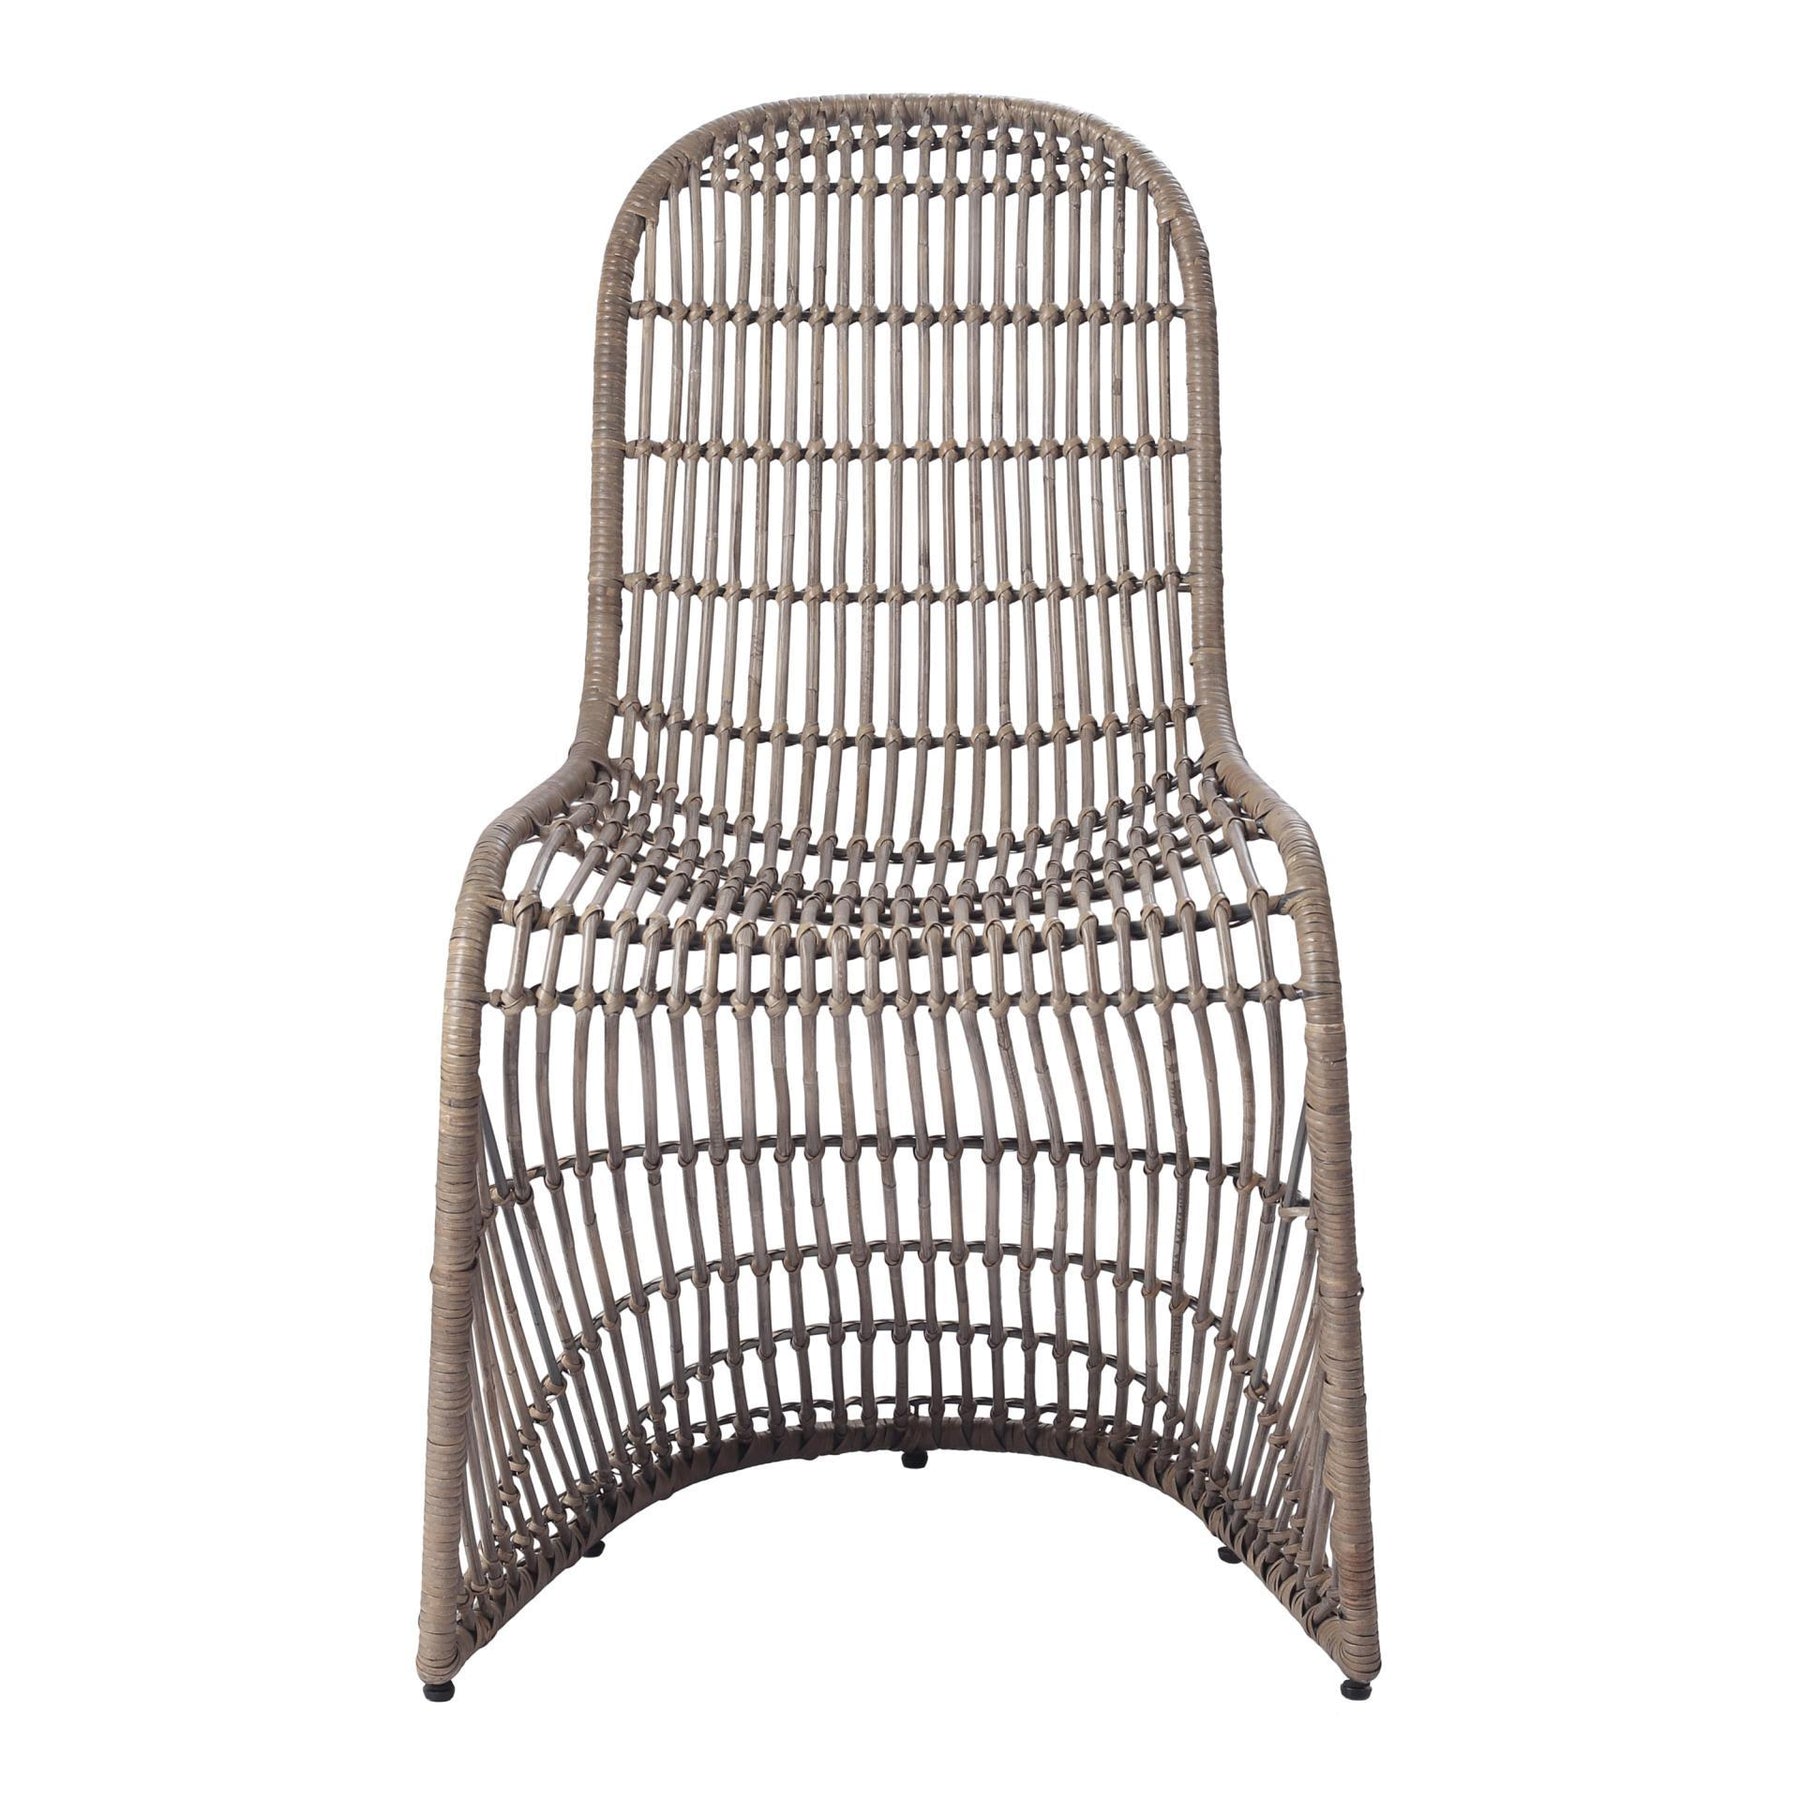 Groovy Rattan Chair (Set of 2) by New Pacific Direct - 6600010